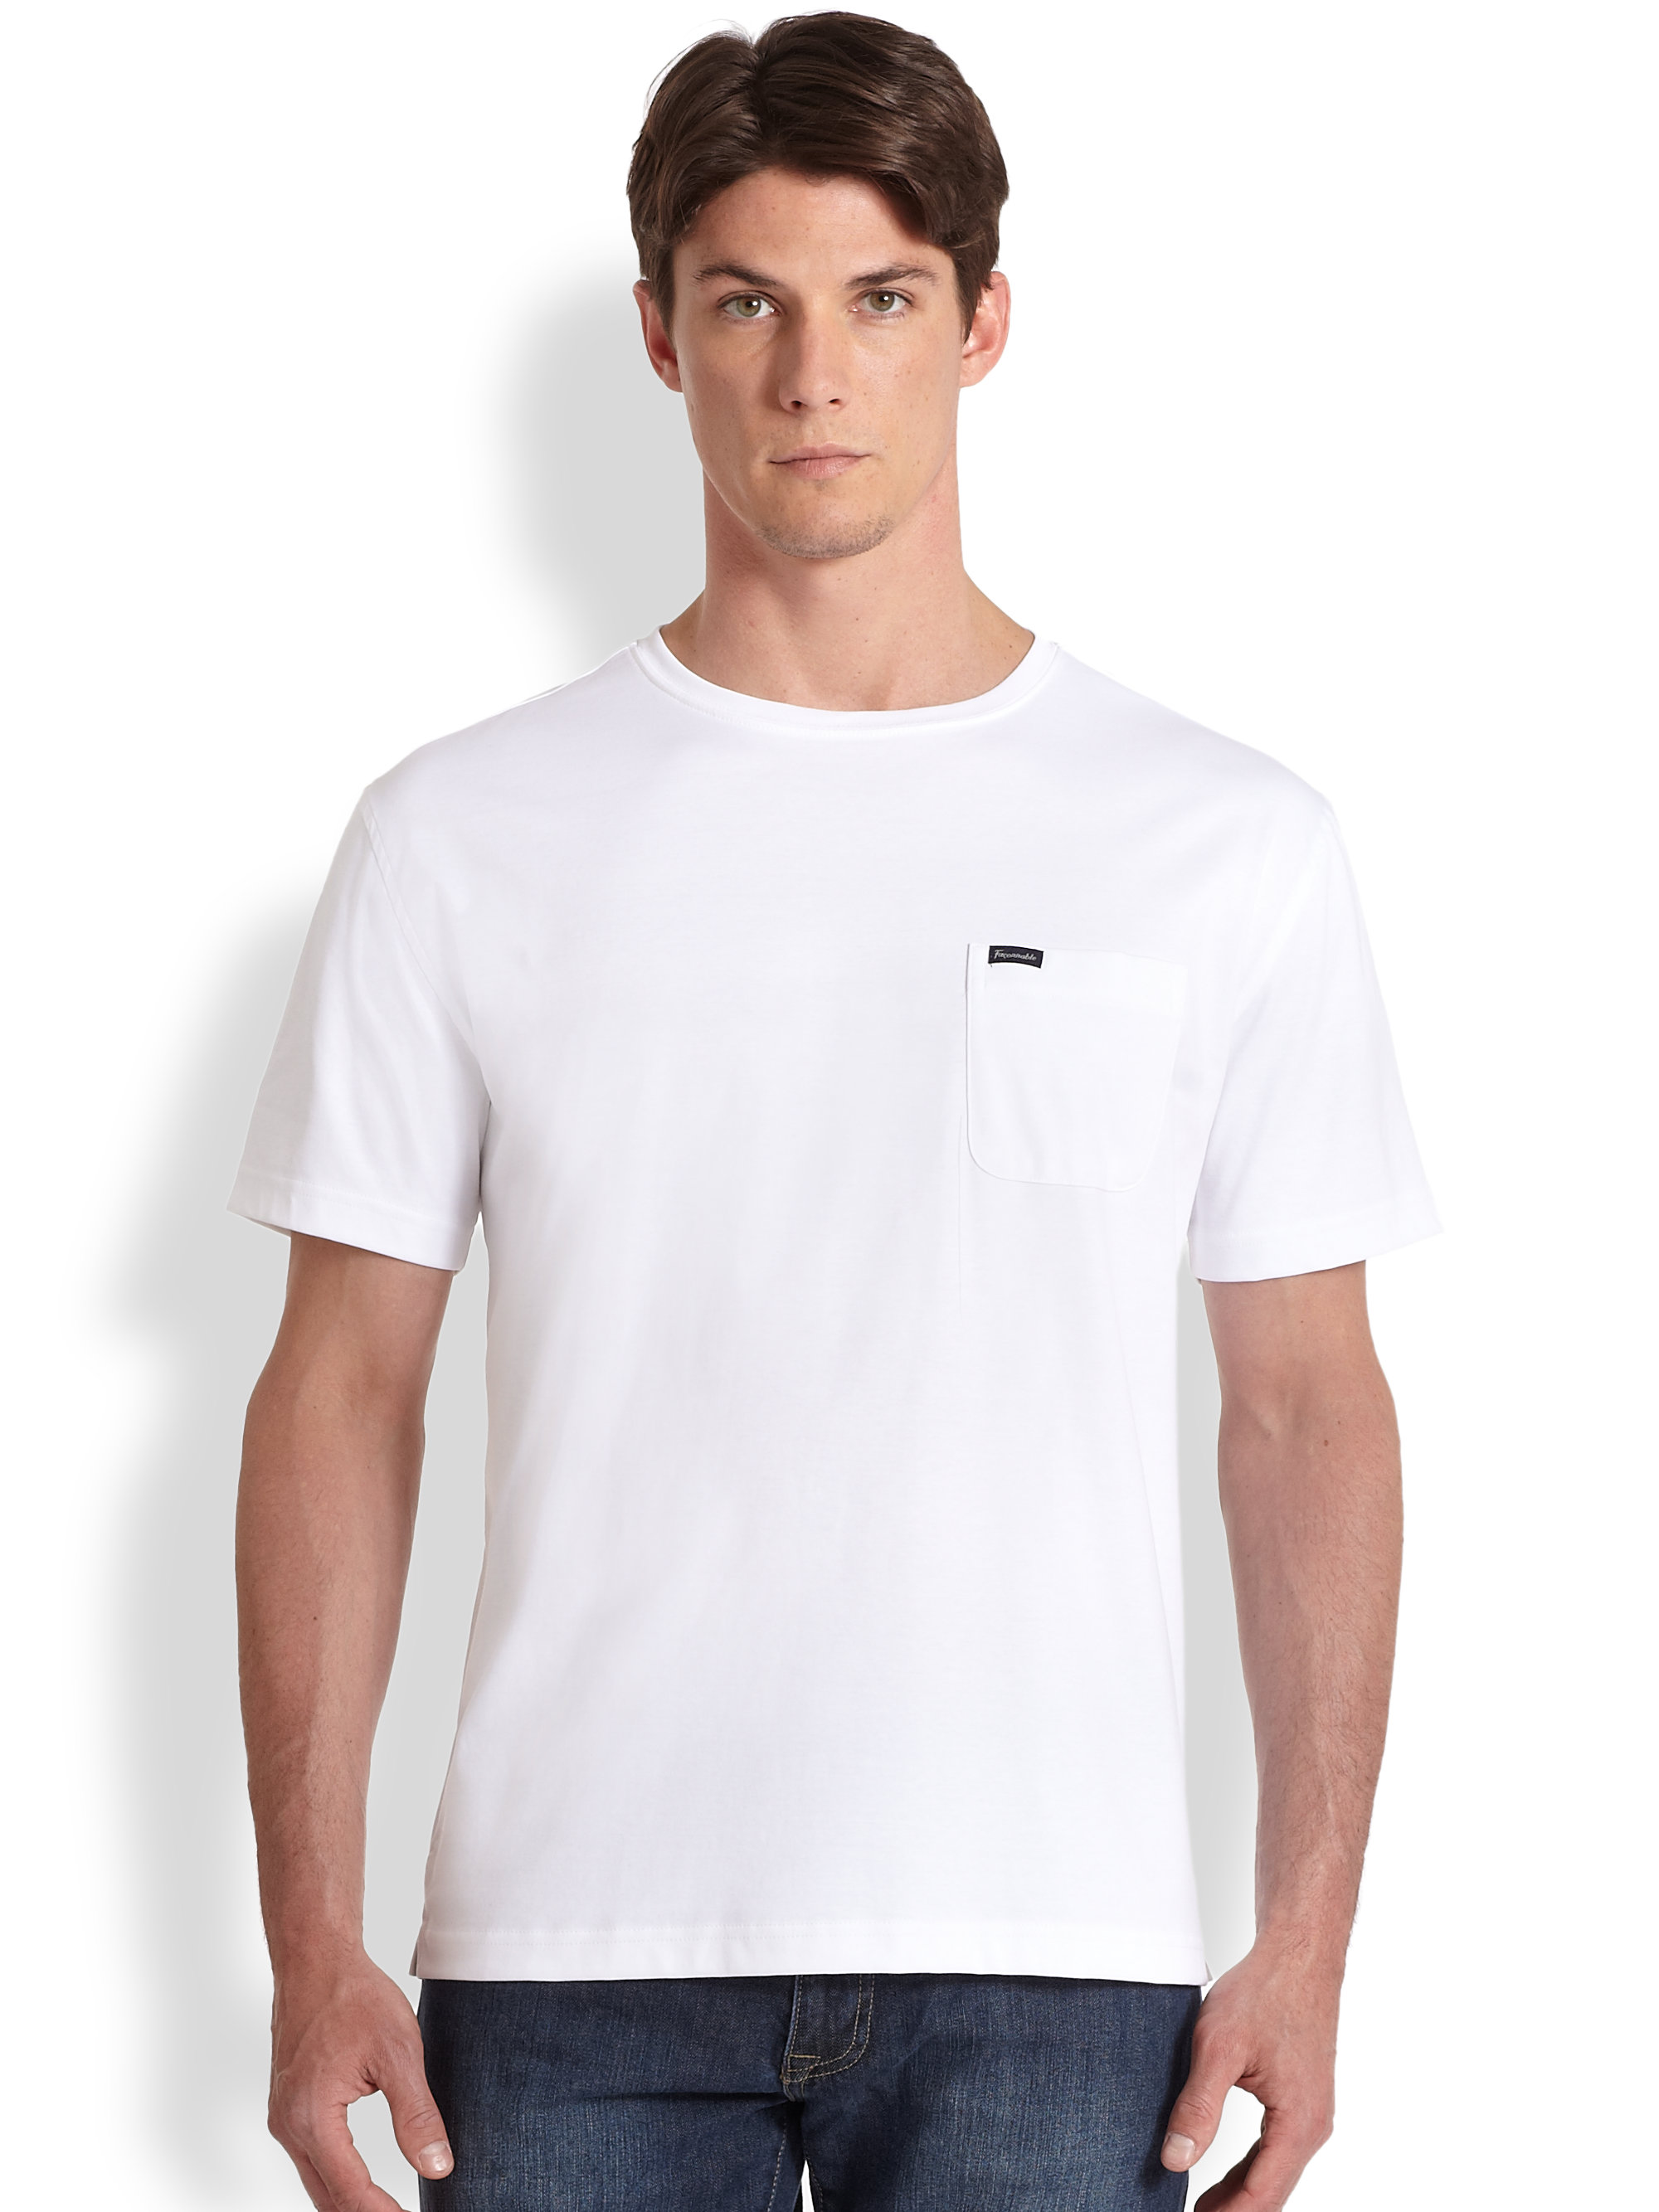 Façonnable Crewneck Pocket Tee in White for Men - Lyst